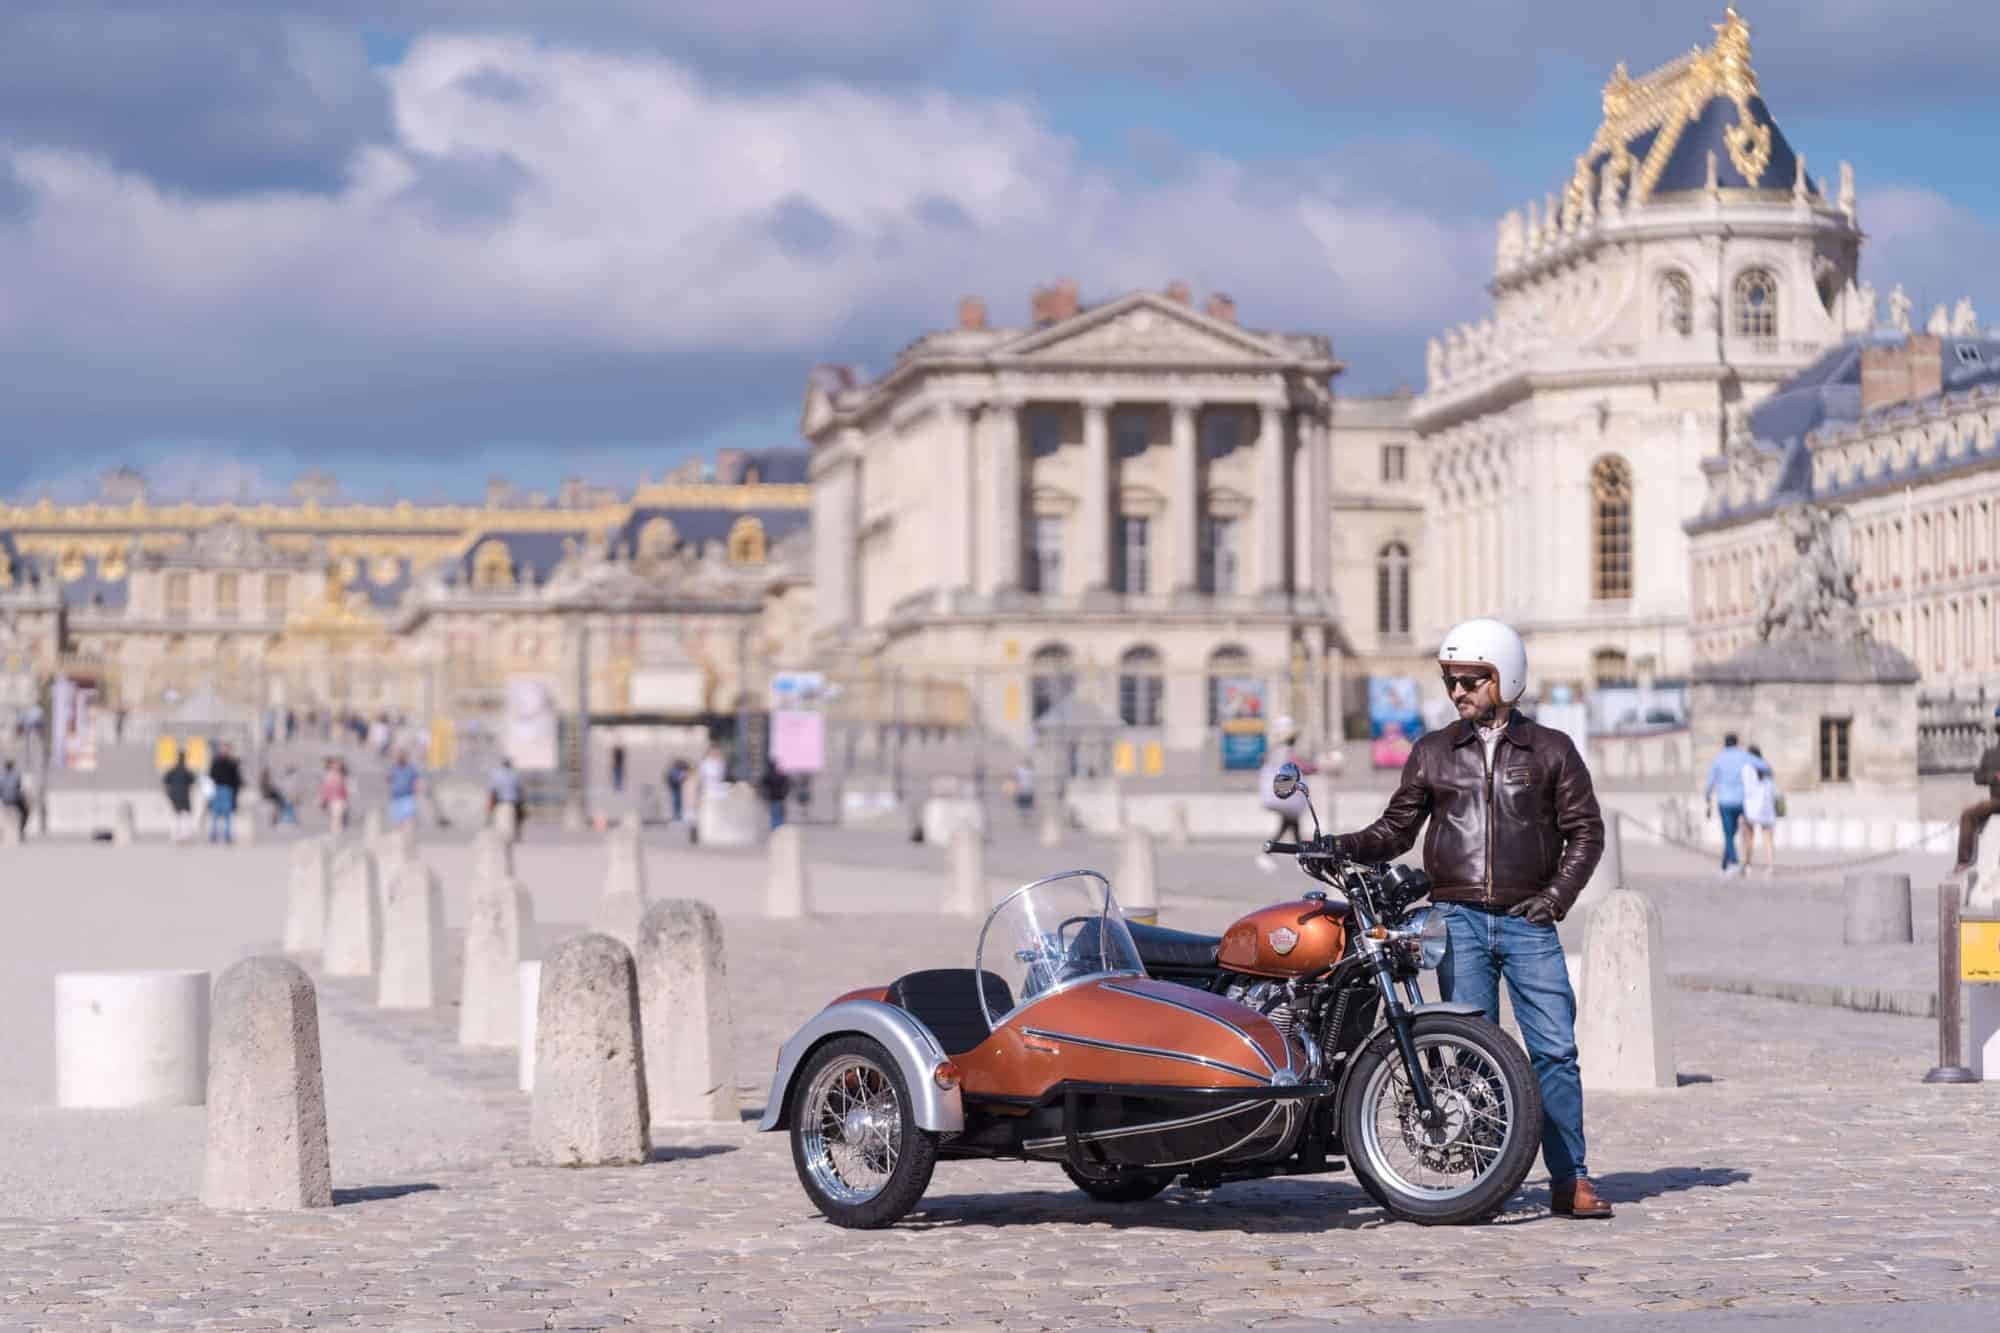 Simon Burke standing next to his vintage motorcyle in front of Château de Versailles.